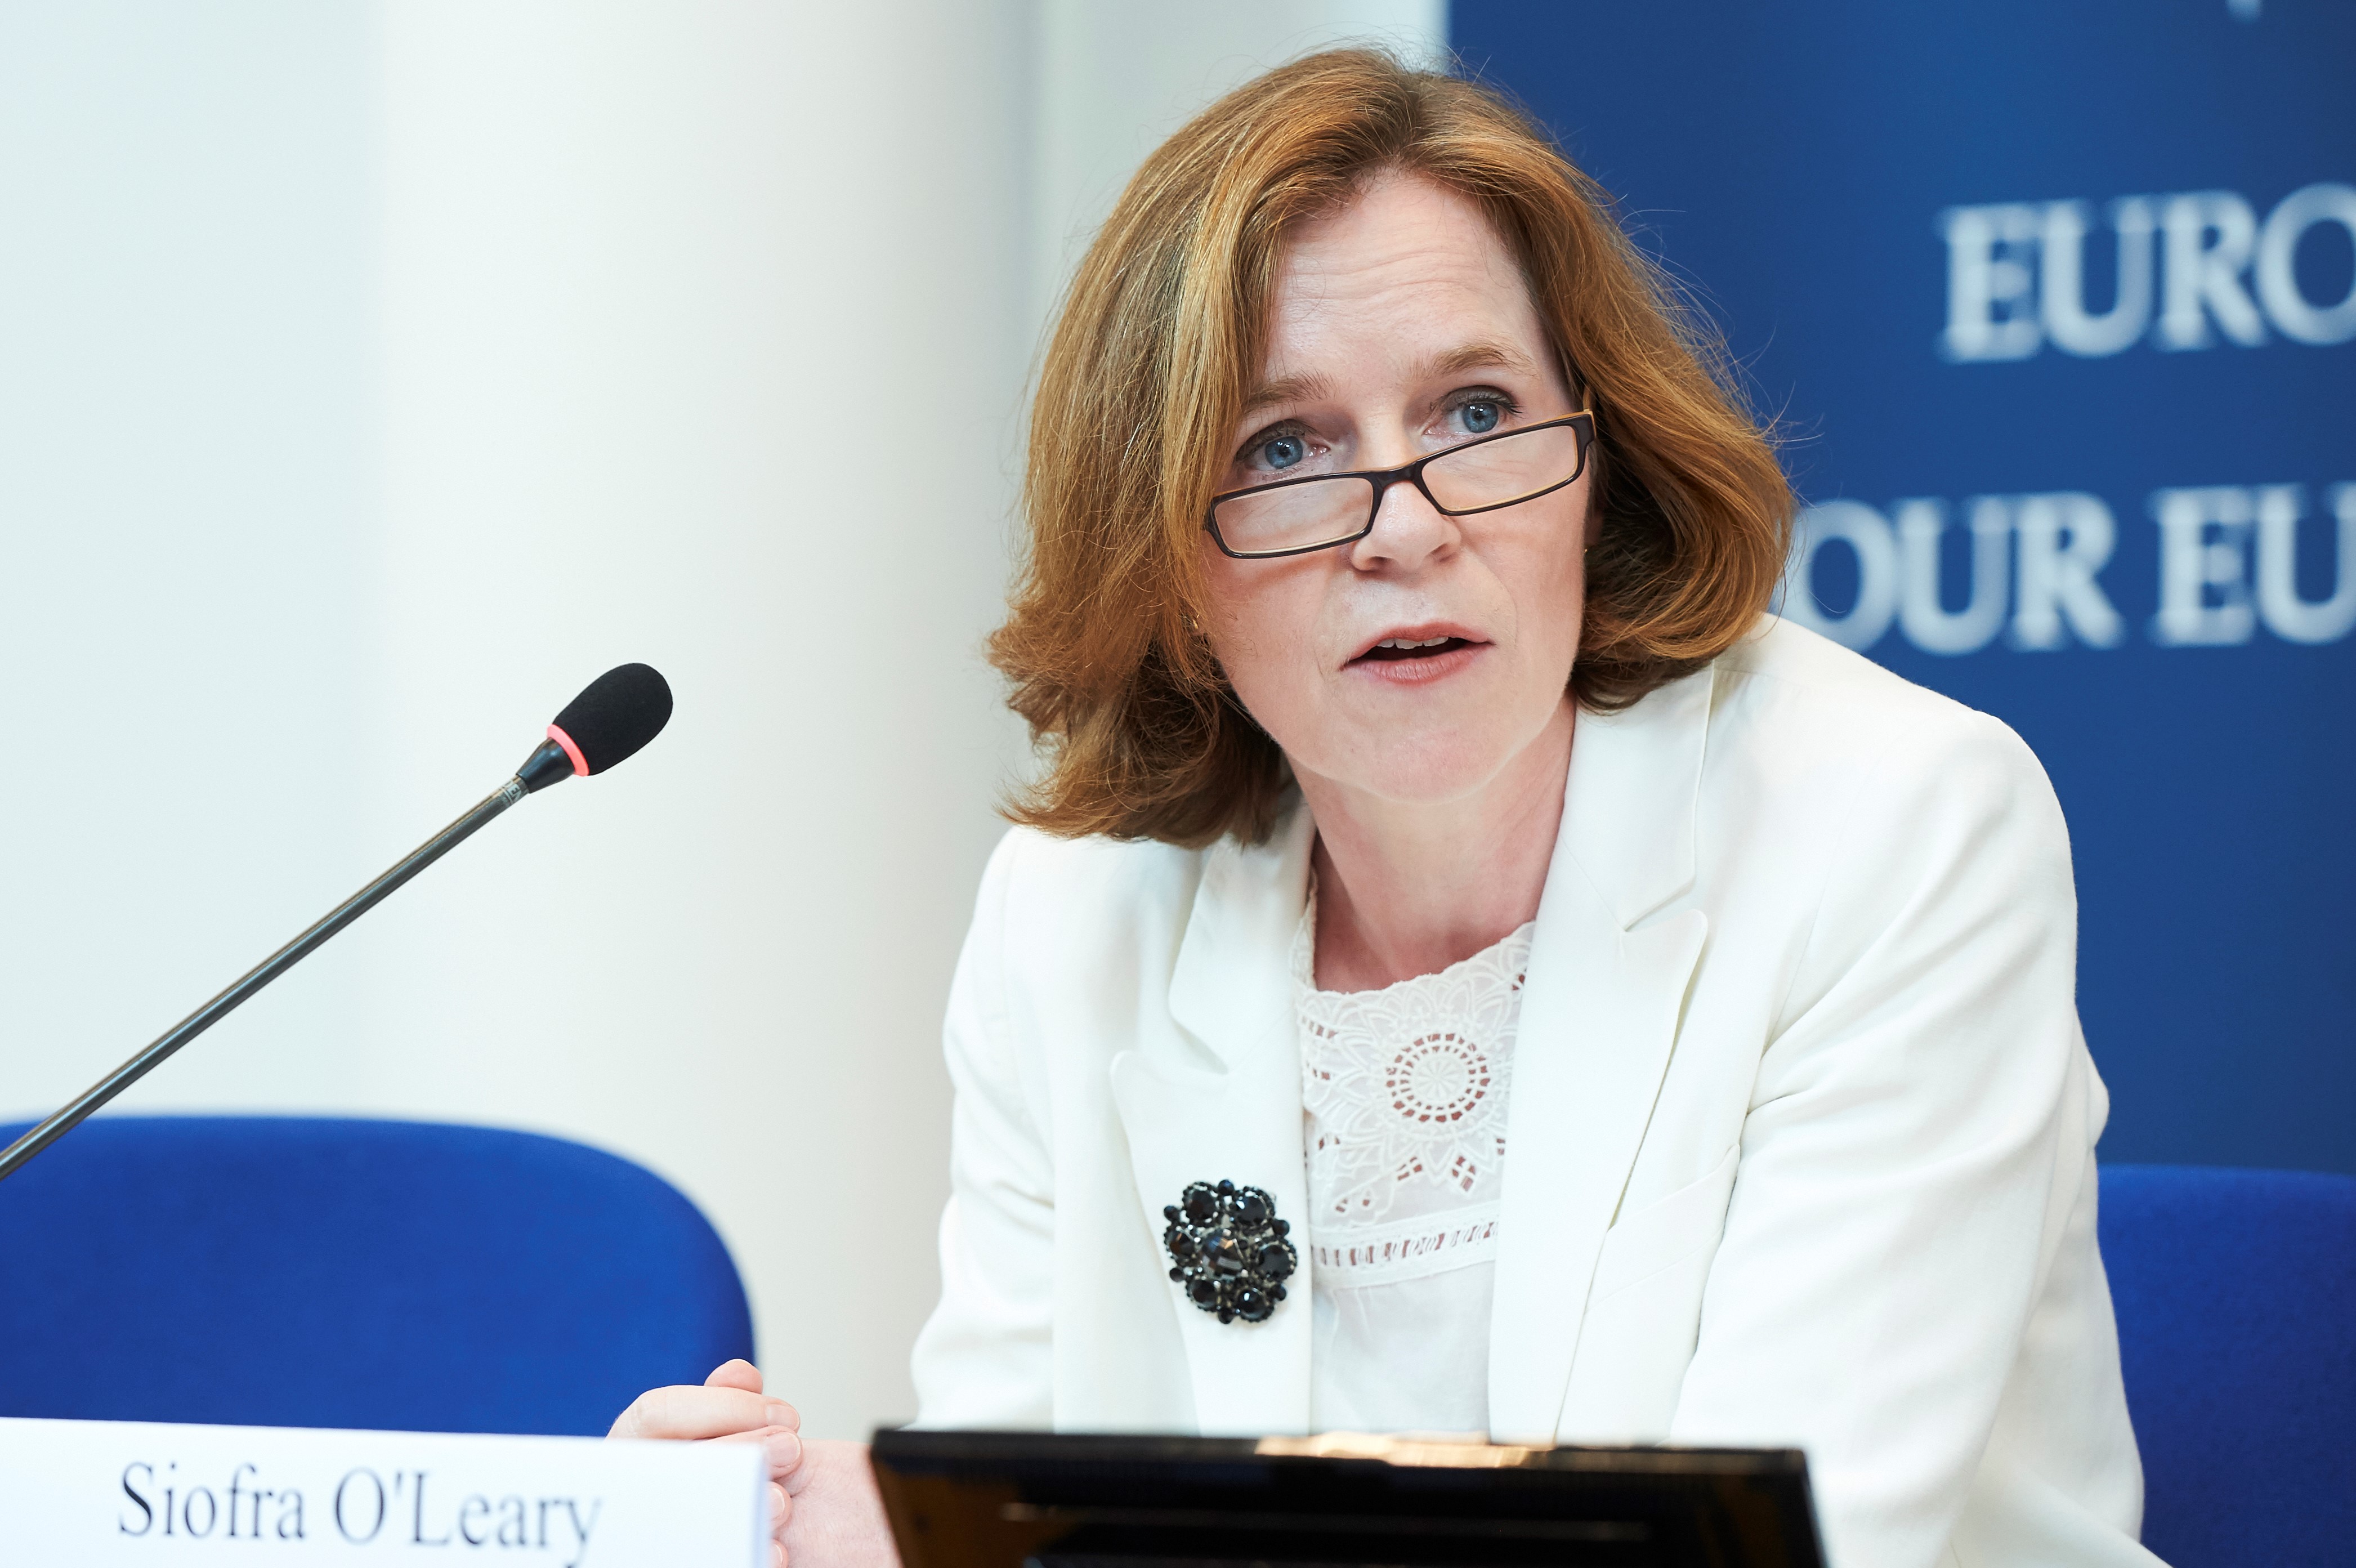 Judge Síofra O’Leary to deliver Centre for Criminal Justice and Human Rights Annual Lecture 2020